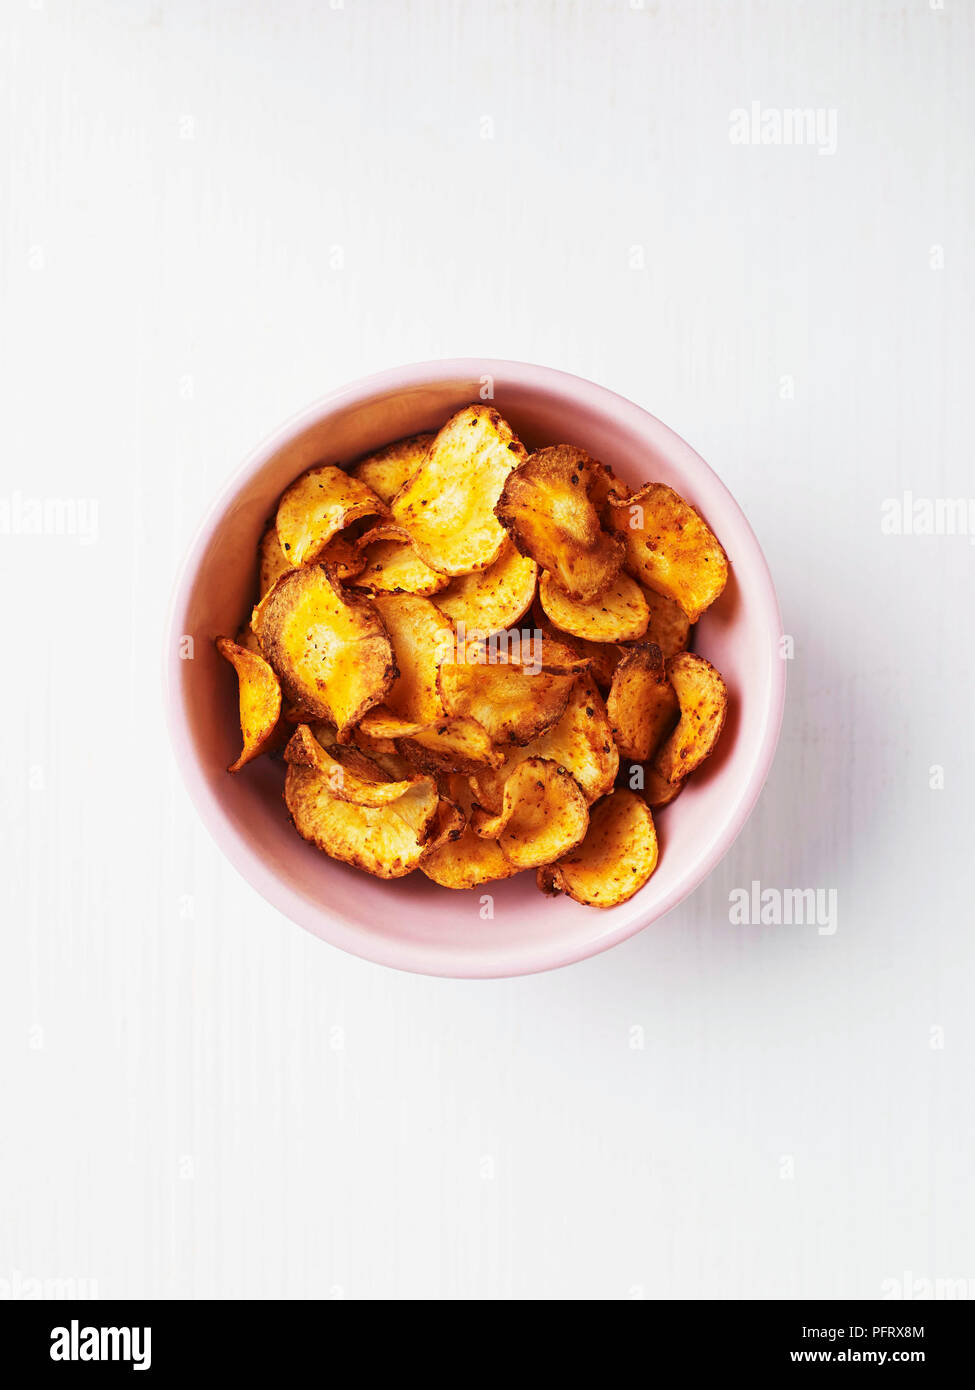 Parsnip vegetable crisps in a bowl Stock Photo